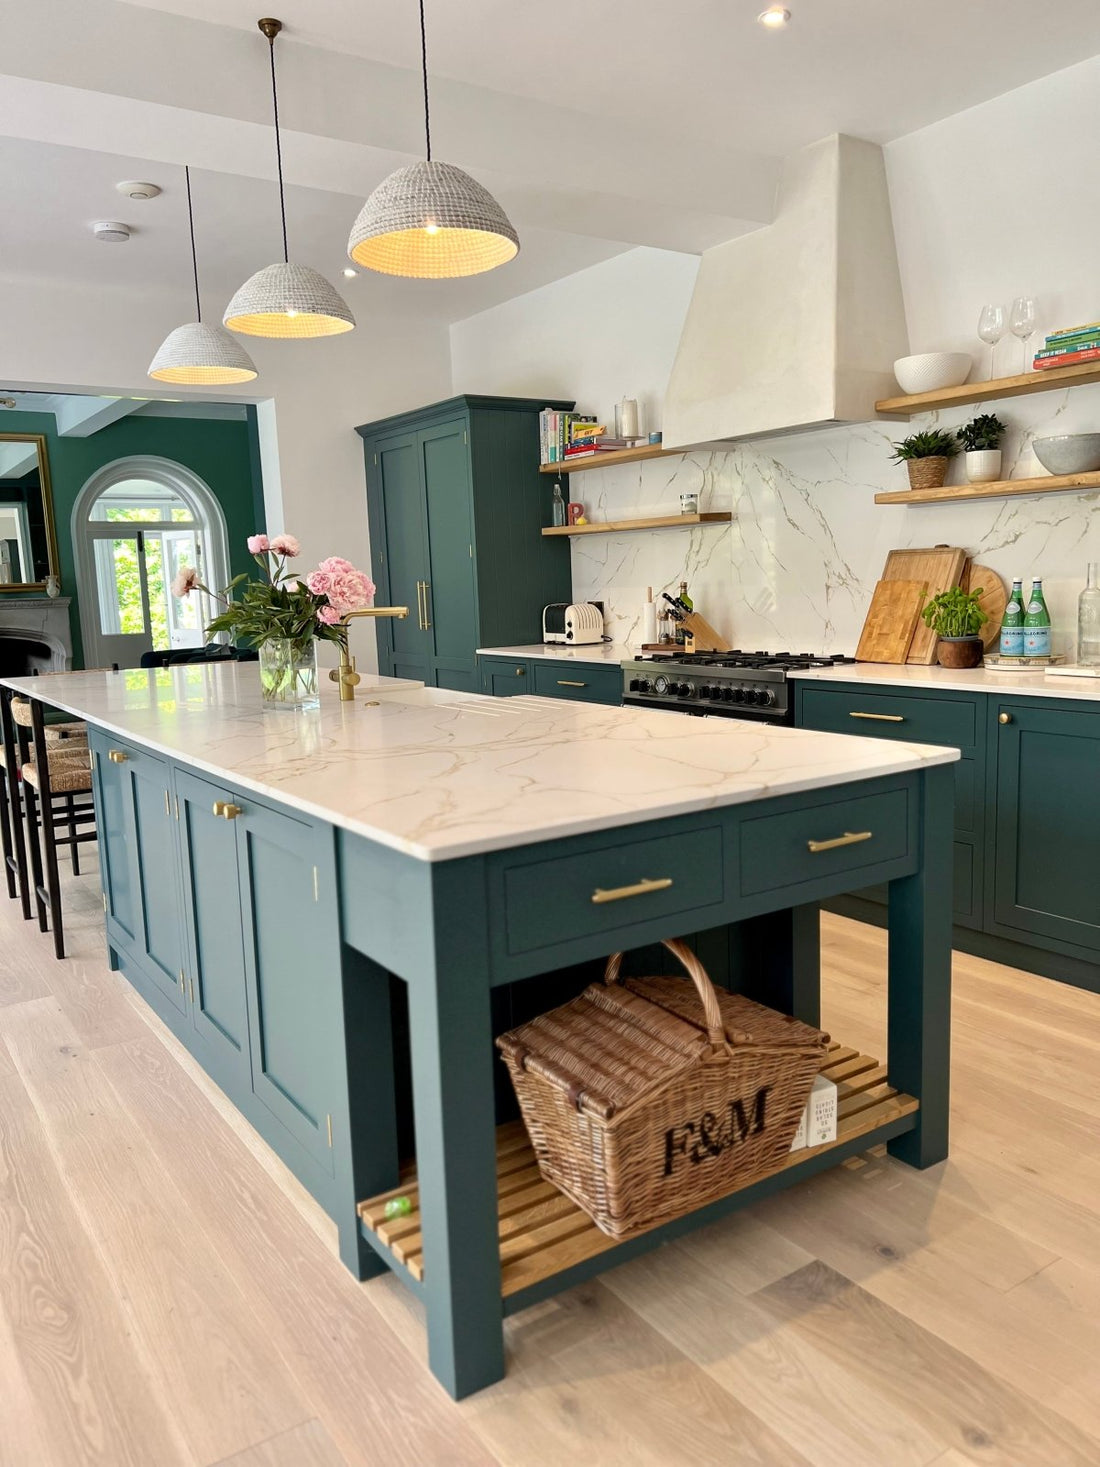 Why Handmade Kitchens Are Worth the Investment - The Painted Kitchen Company Ltd